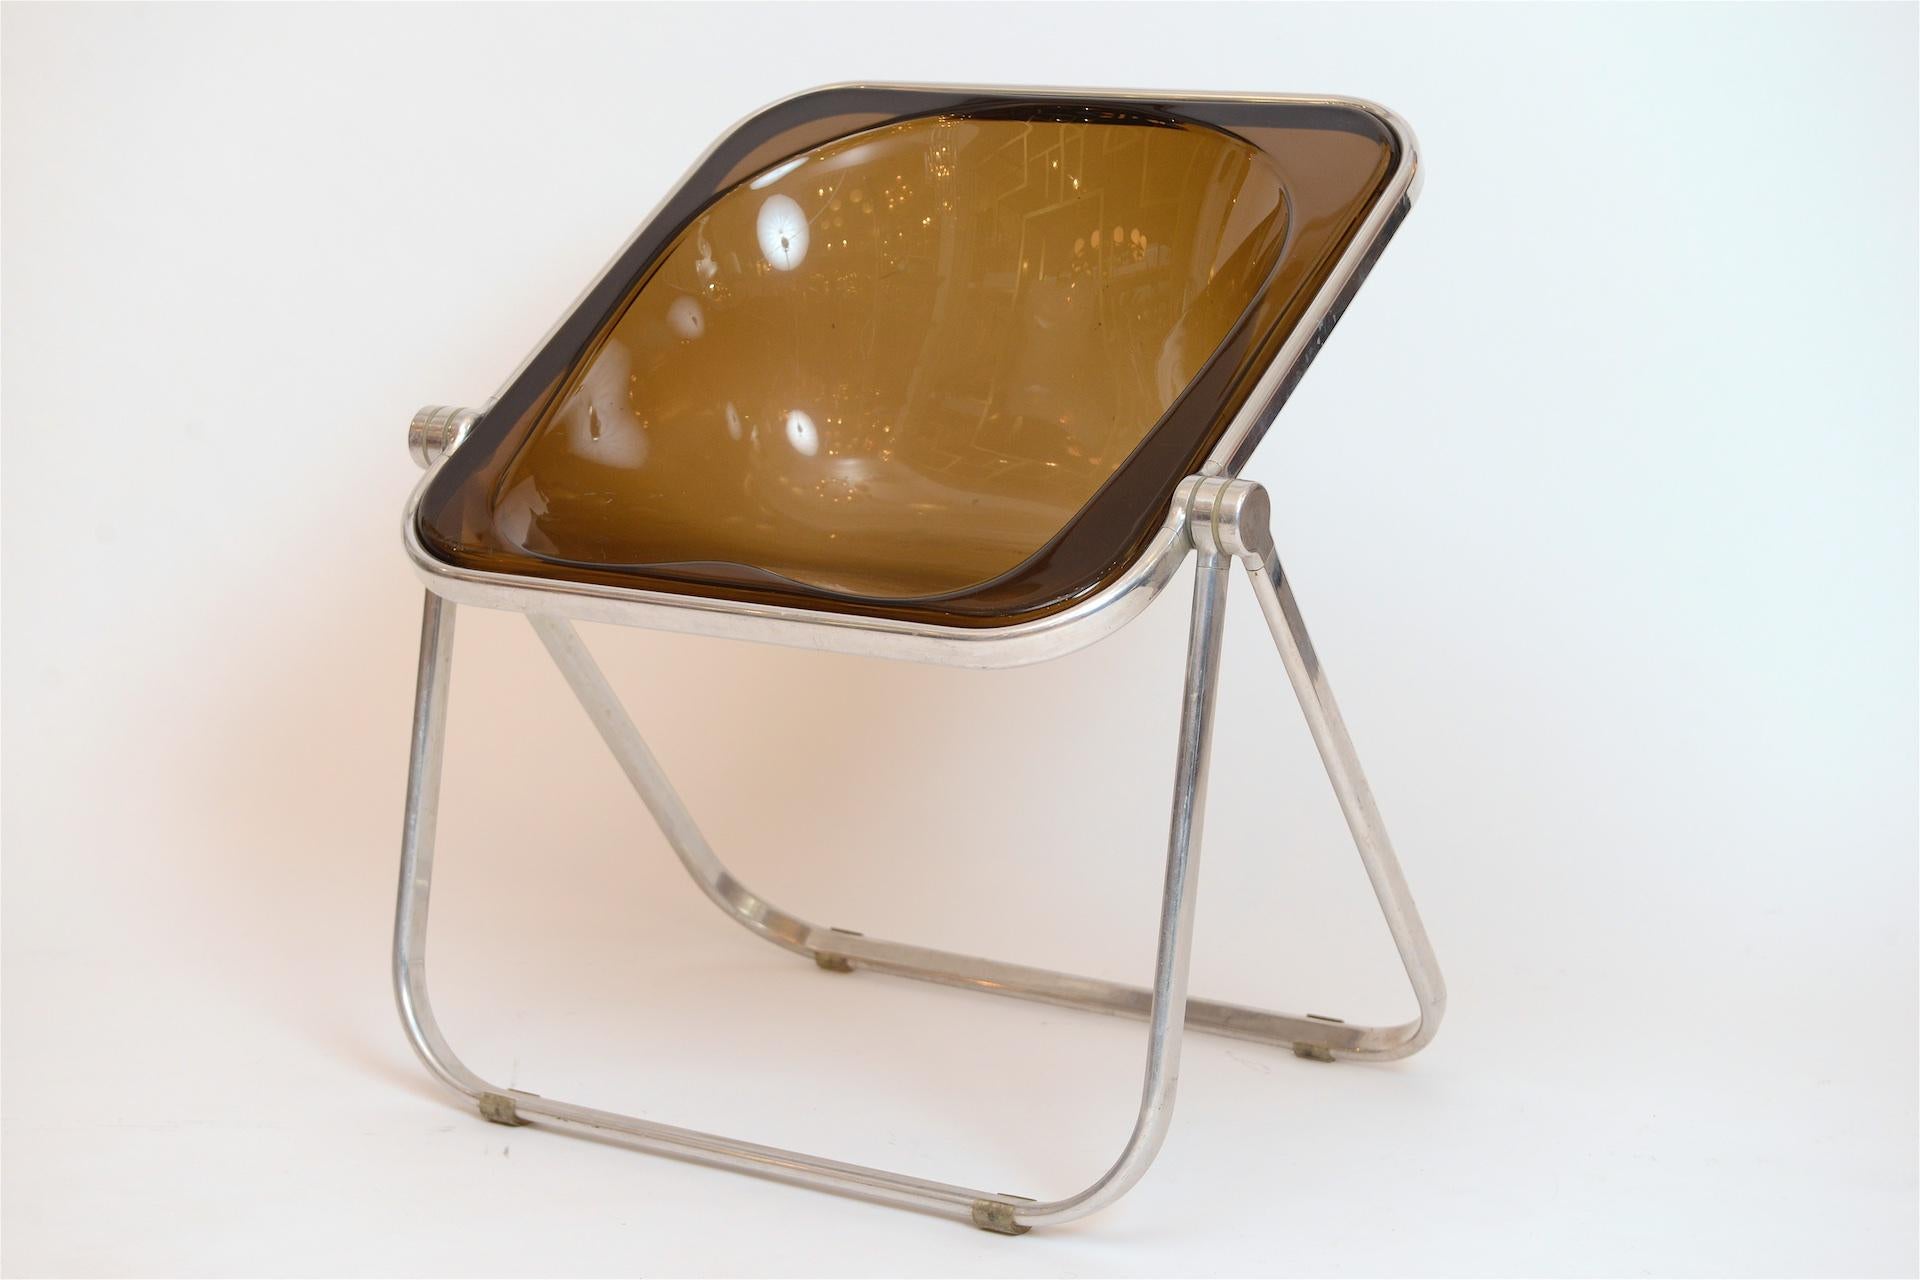 Smoked Lucite Plona chair in great vintage condition

When folded dimensions are...20cm x 68cm.